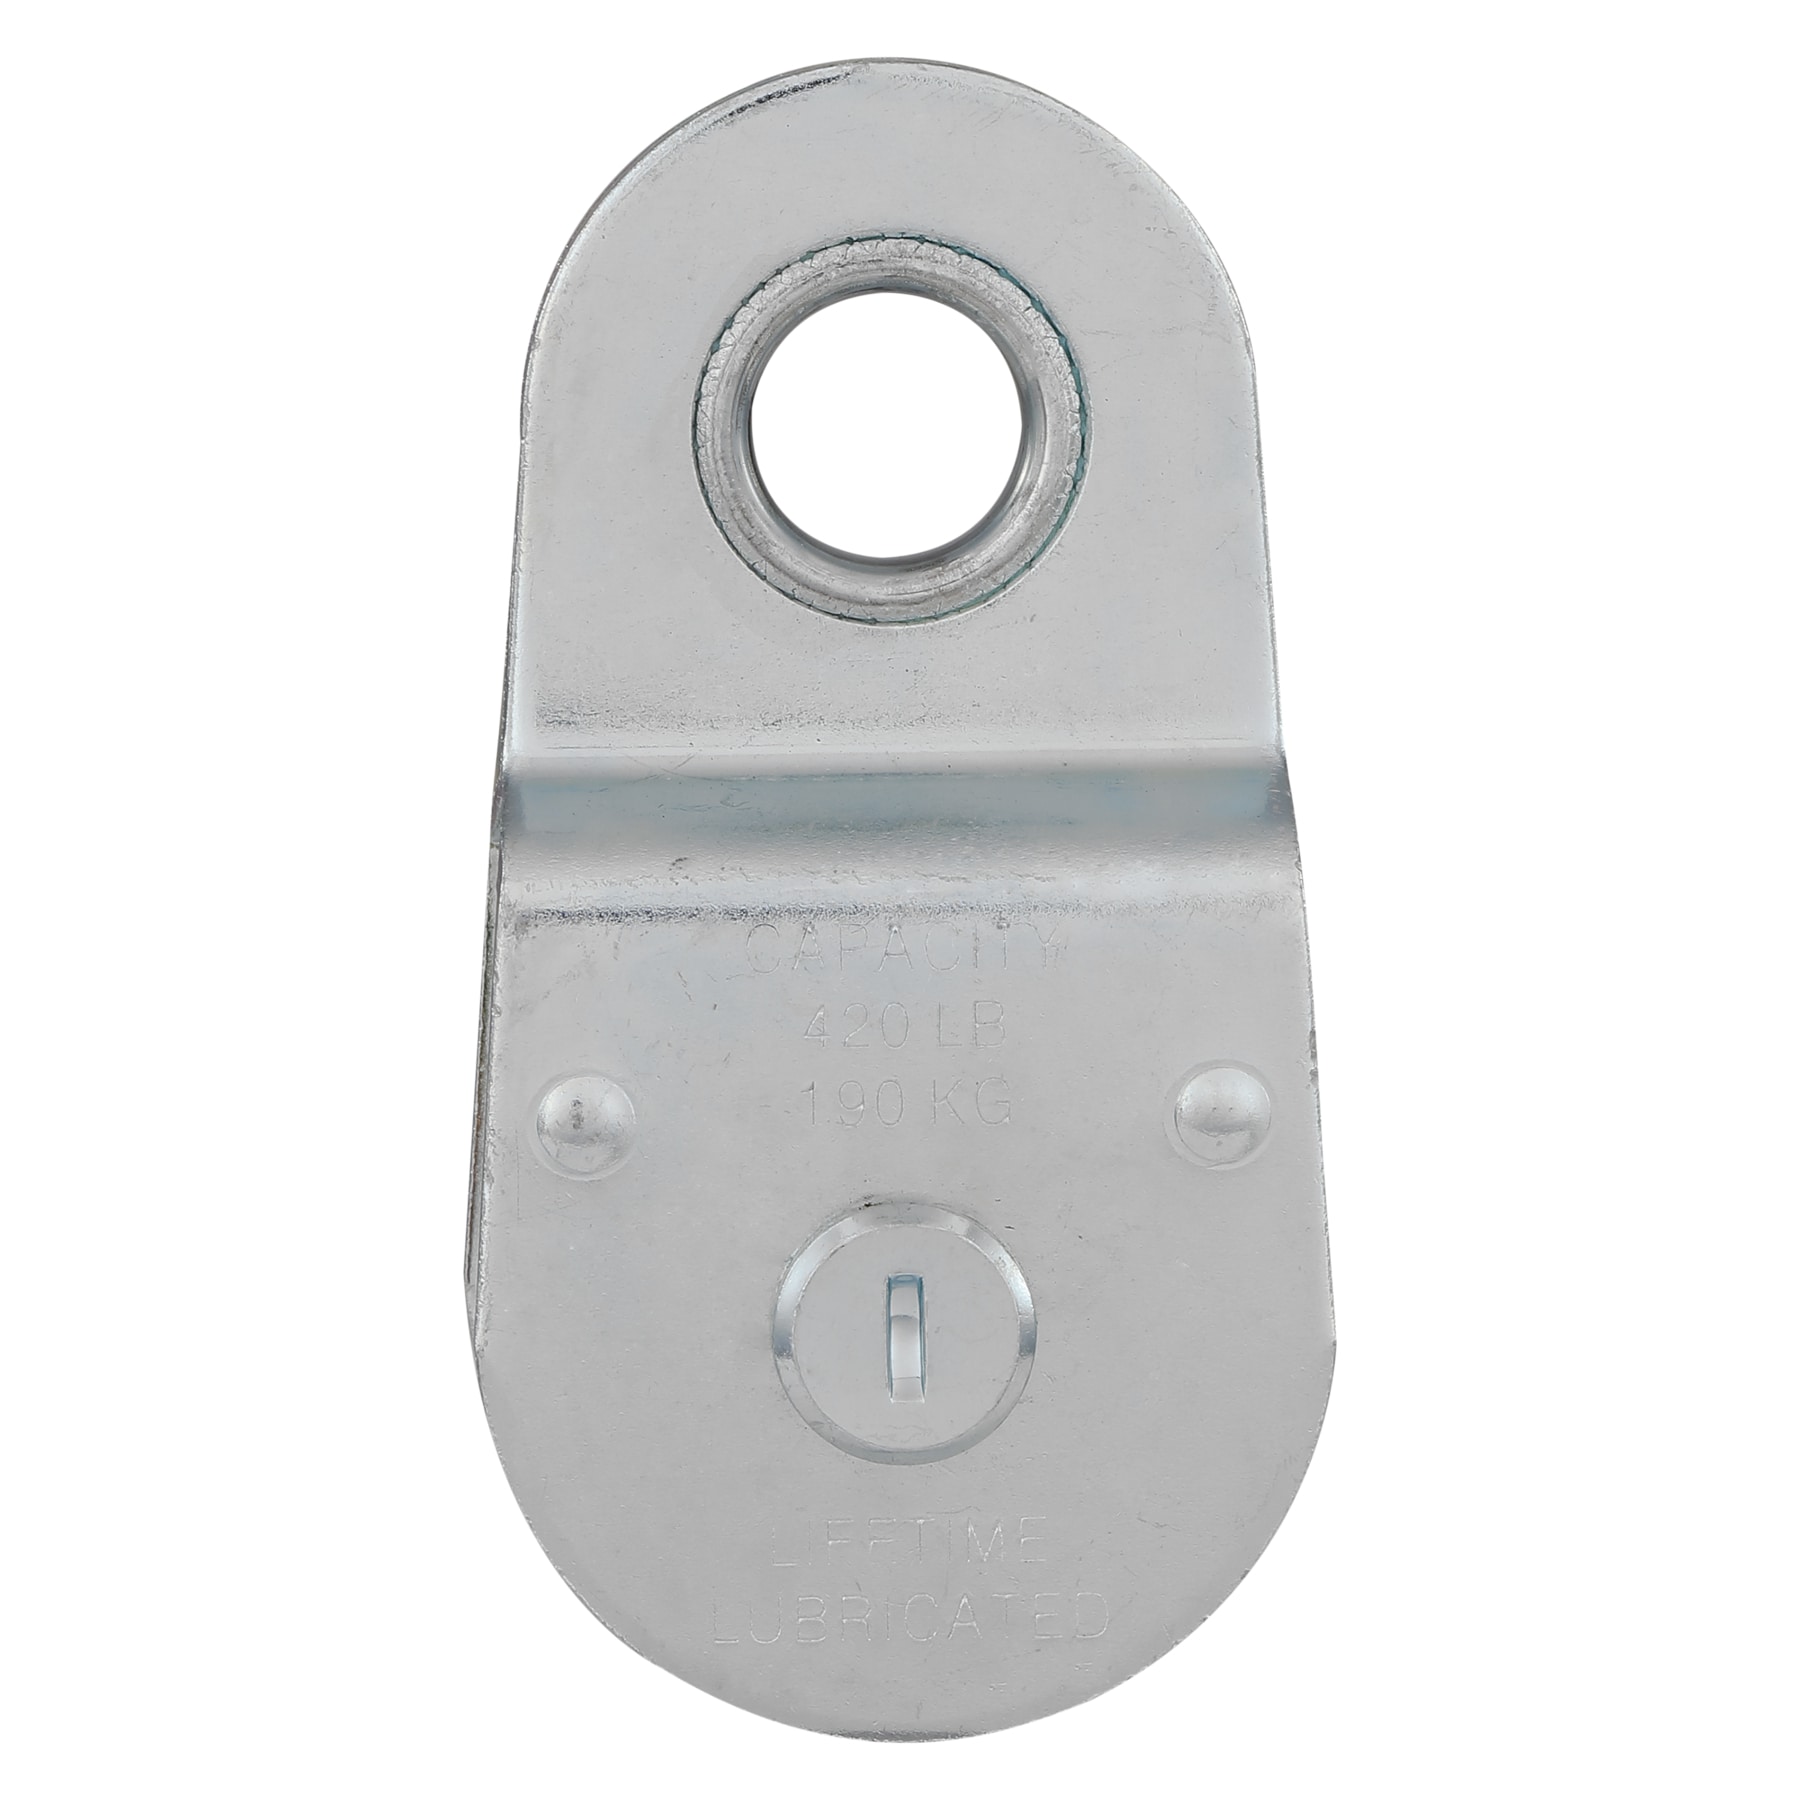 Stanley National Hardware 3211BC 3" Zinc Plated Swivel Single Pulley 